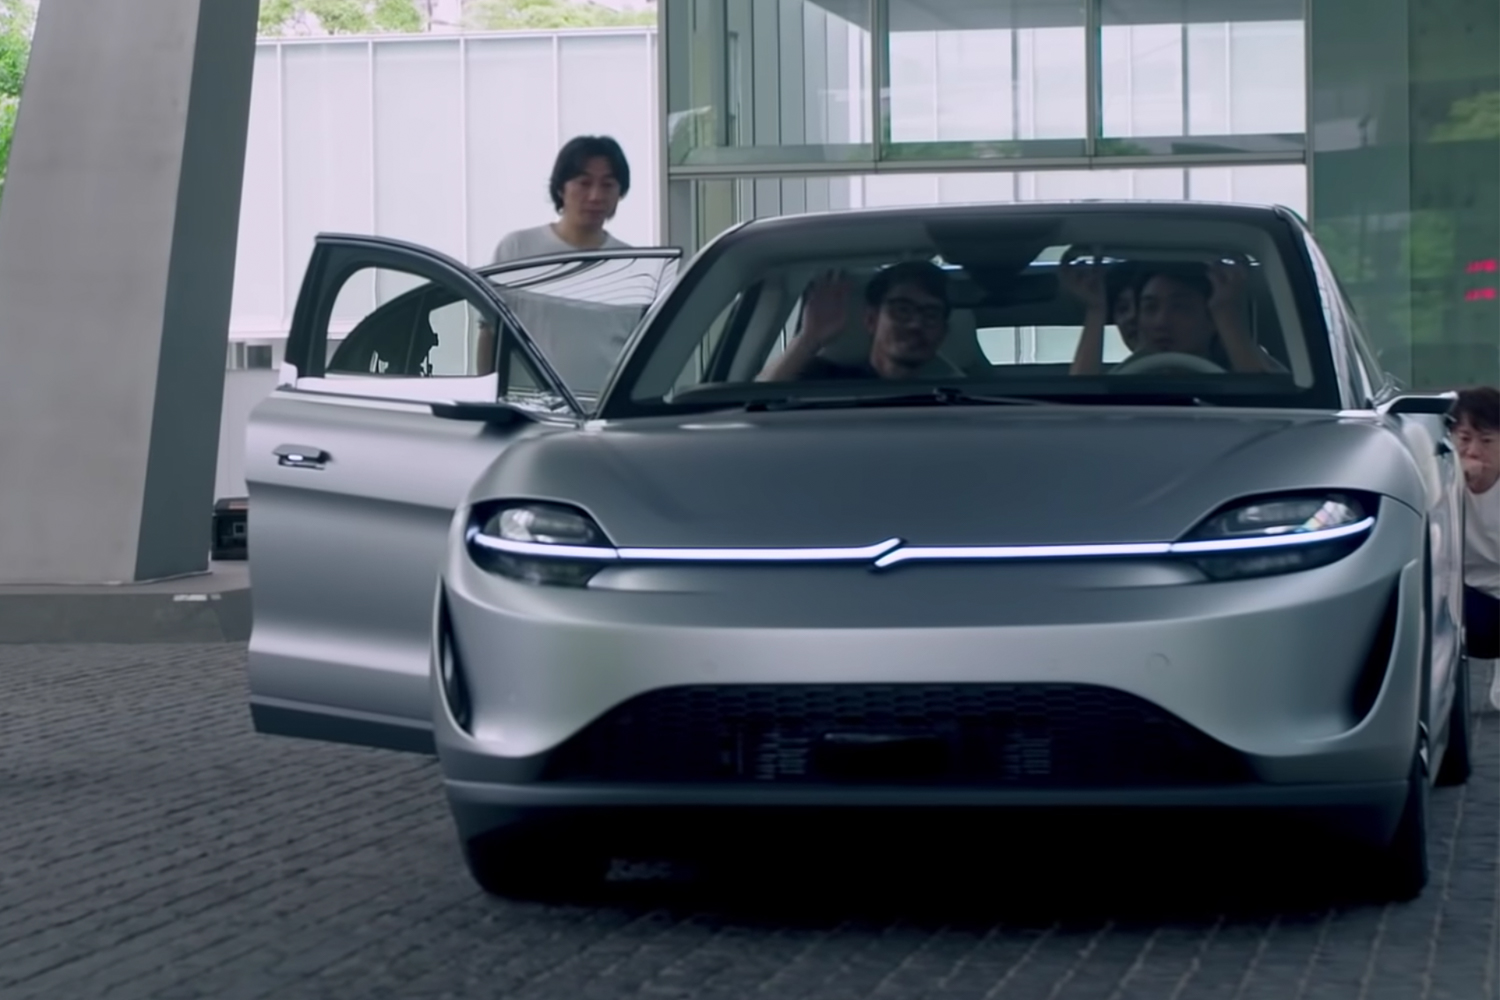 Sony Vision-S concept car in a new YouTube video from Tokyo